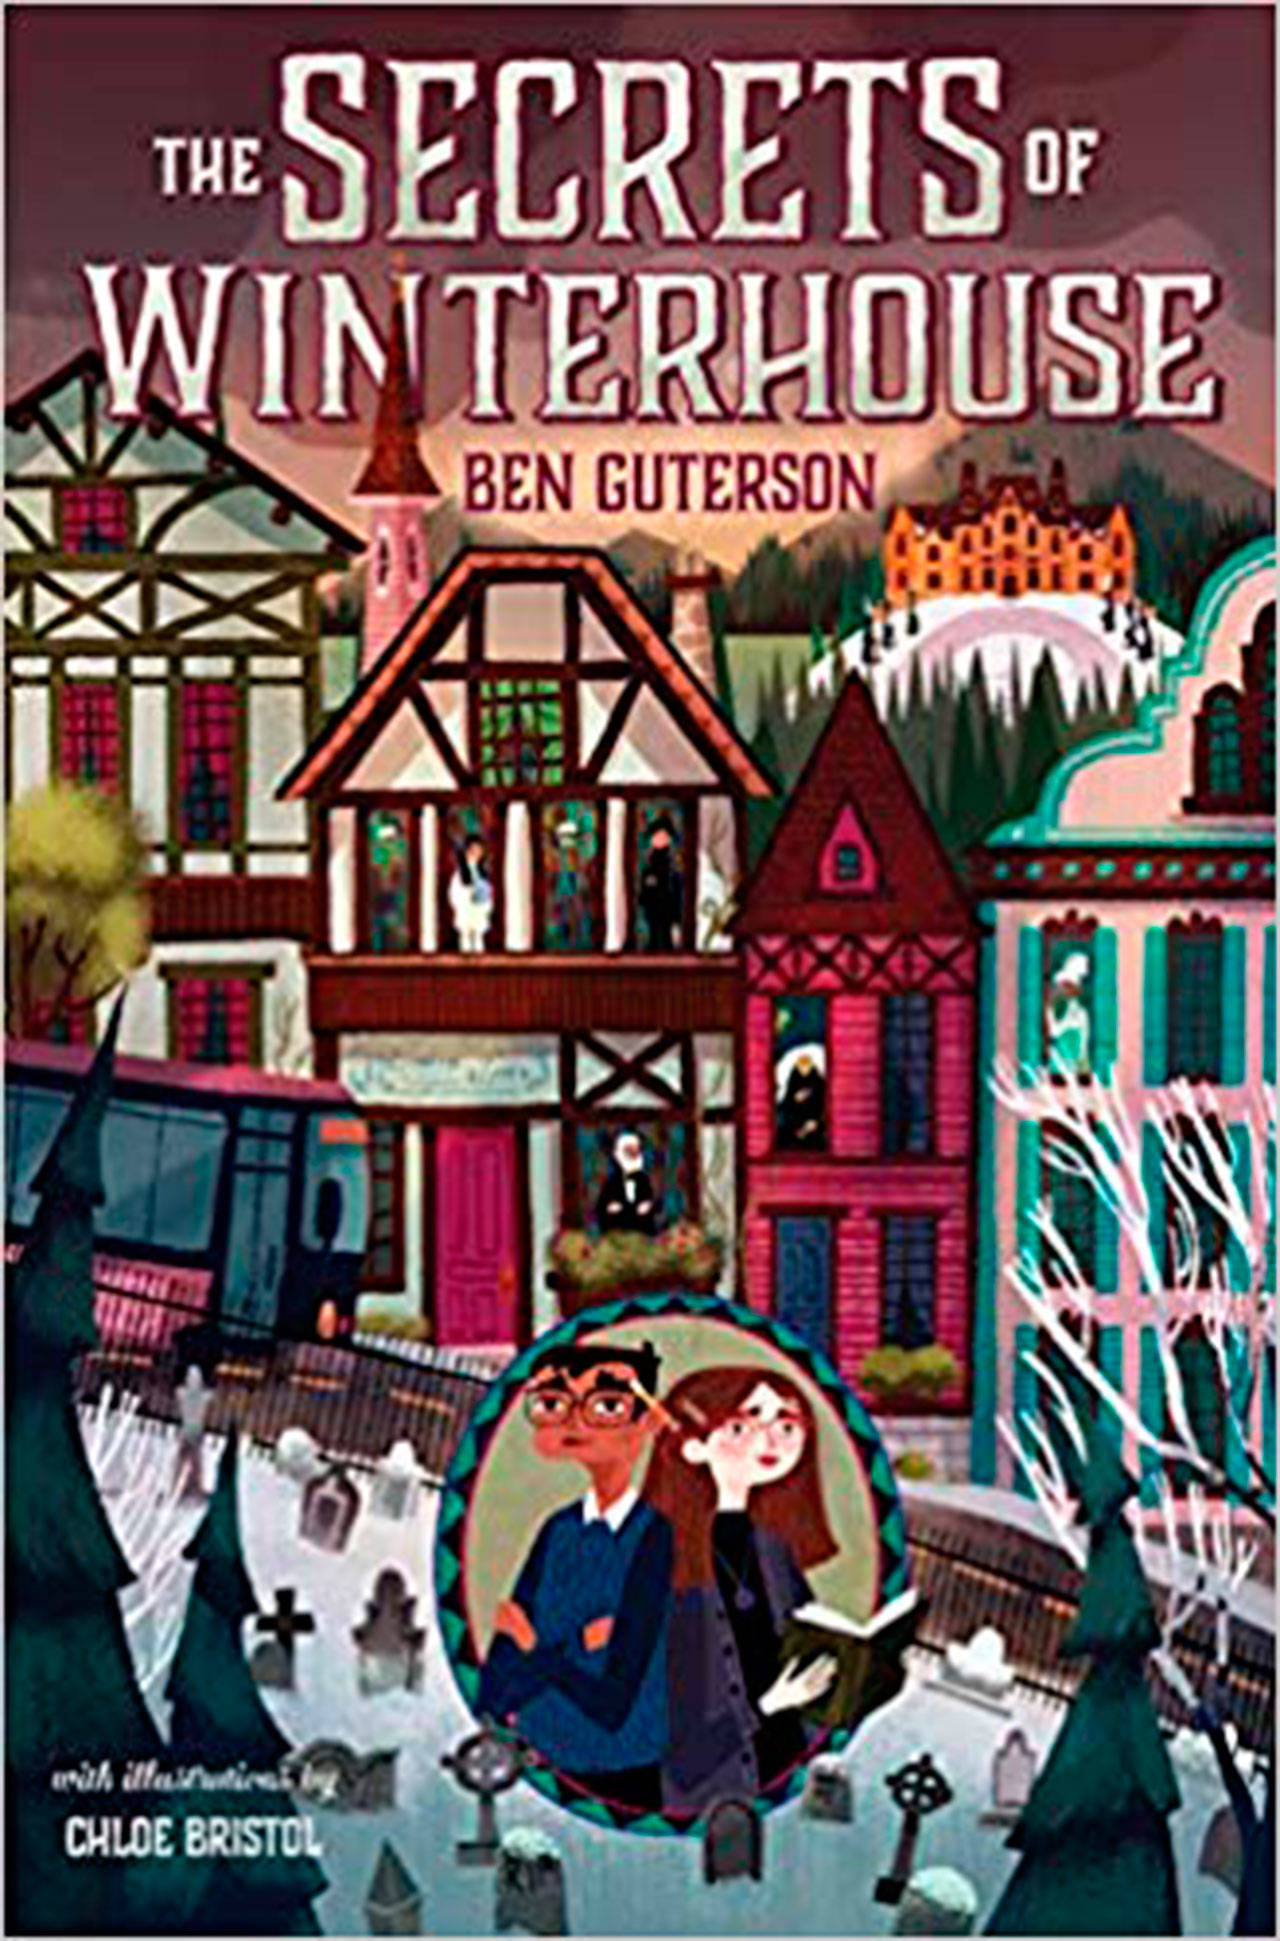 Image courtesy of Eagle Harbor Book Company | Edgar Award nominee Ben Guterson will be at Eagle Harbor Book Company at 3 p.m. Sunday, March 10 to discuss his new middle-grade reader offering “The Secrets of Winterhouse.”